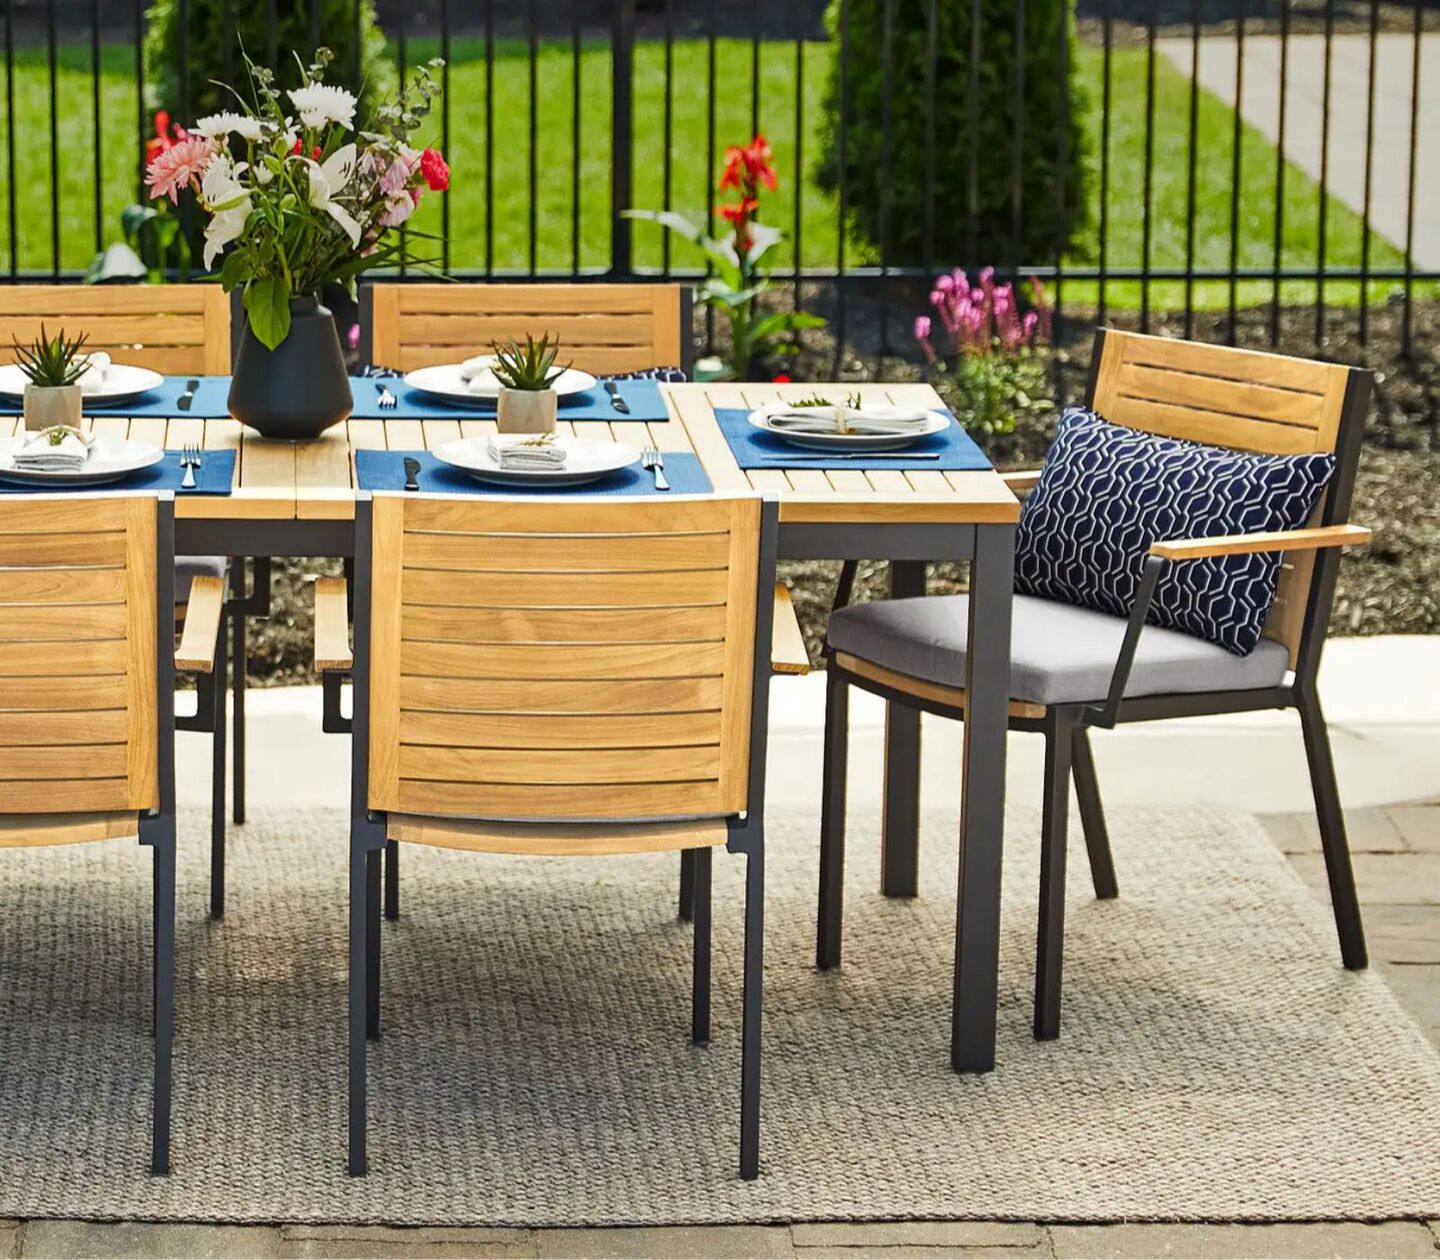 Wooden patio table and matching chairs with grey metal legs